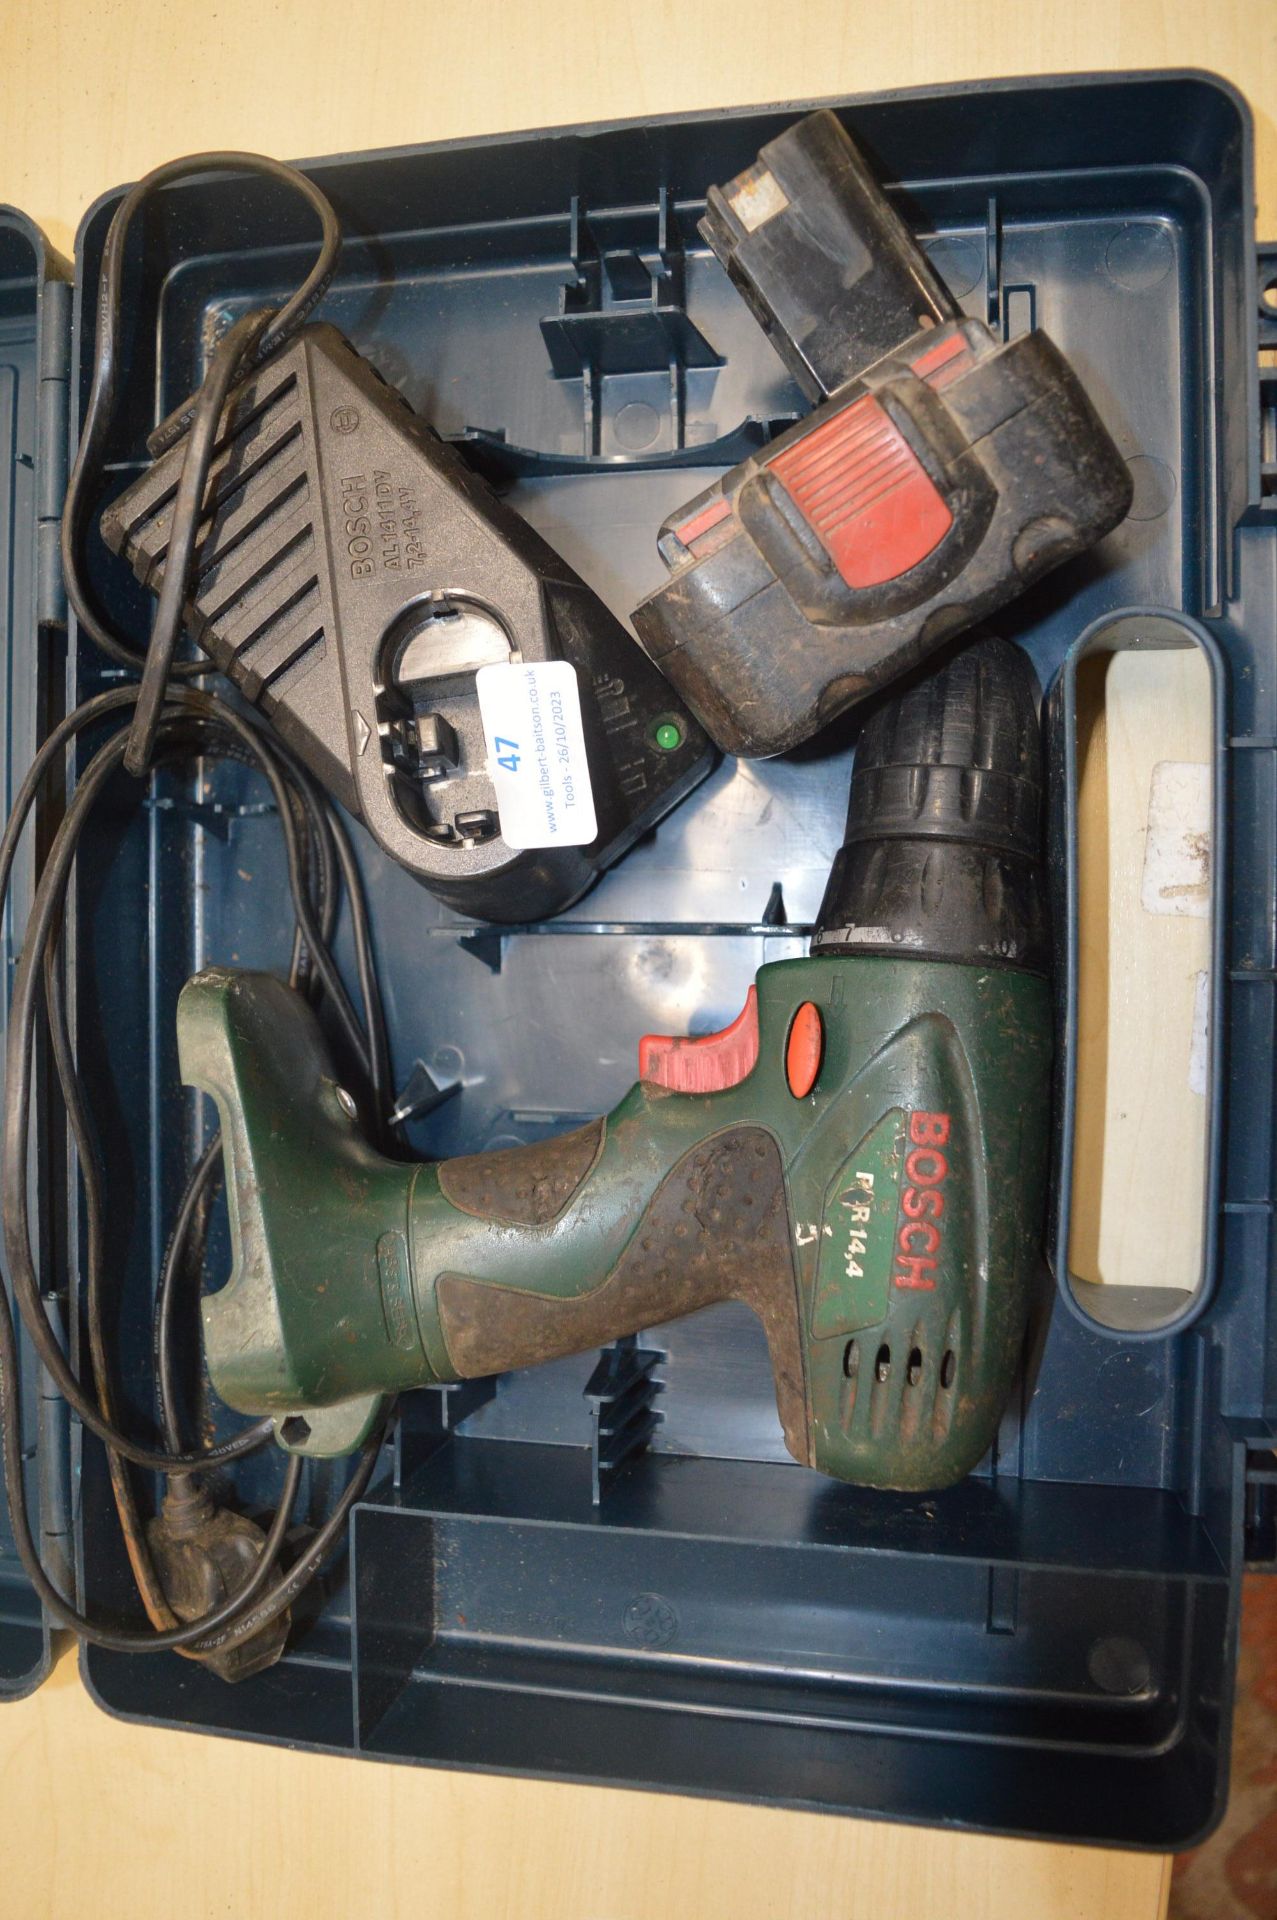 *Bosch Drill with Battery, Charger, and Case